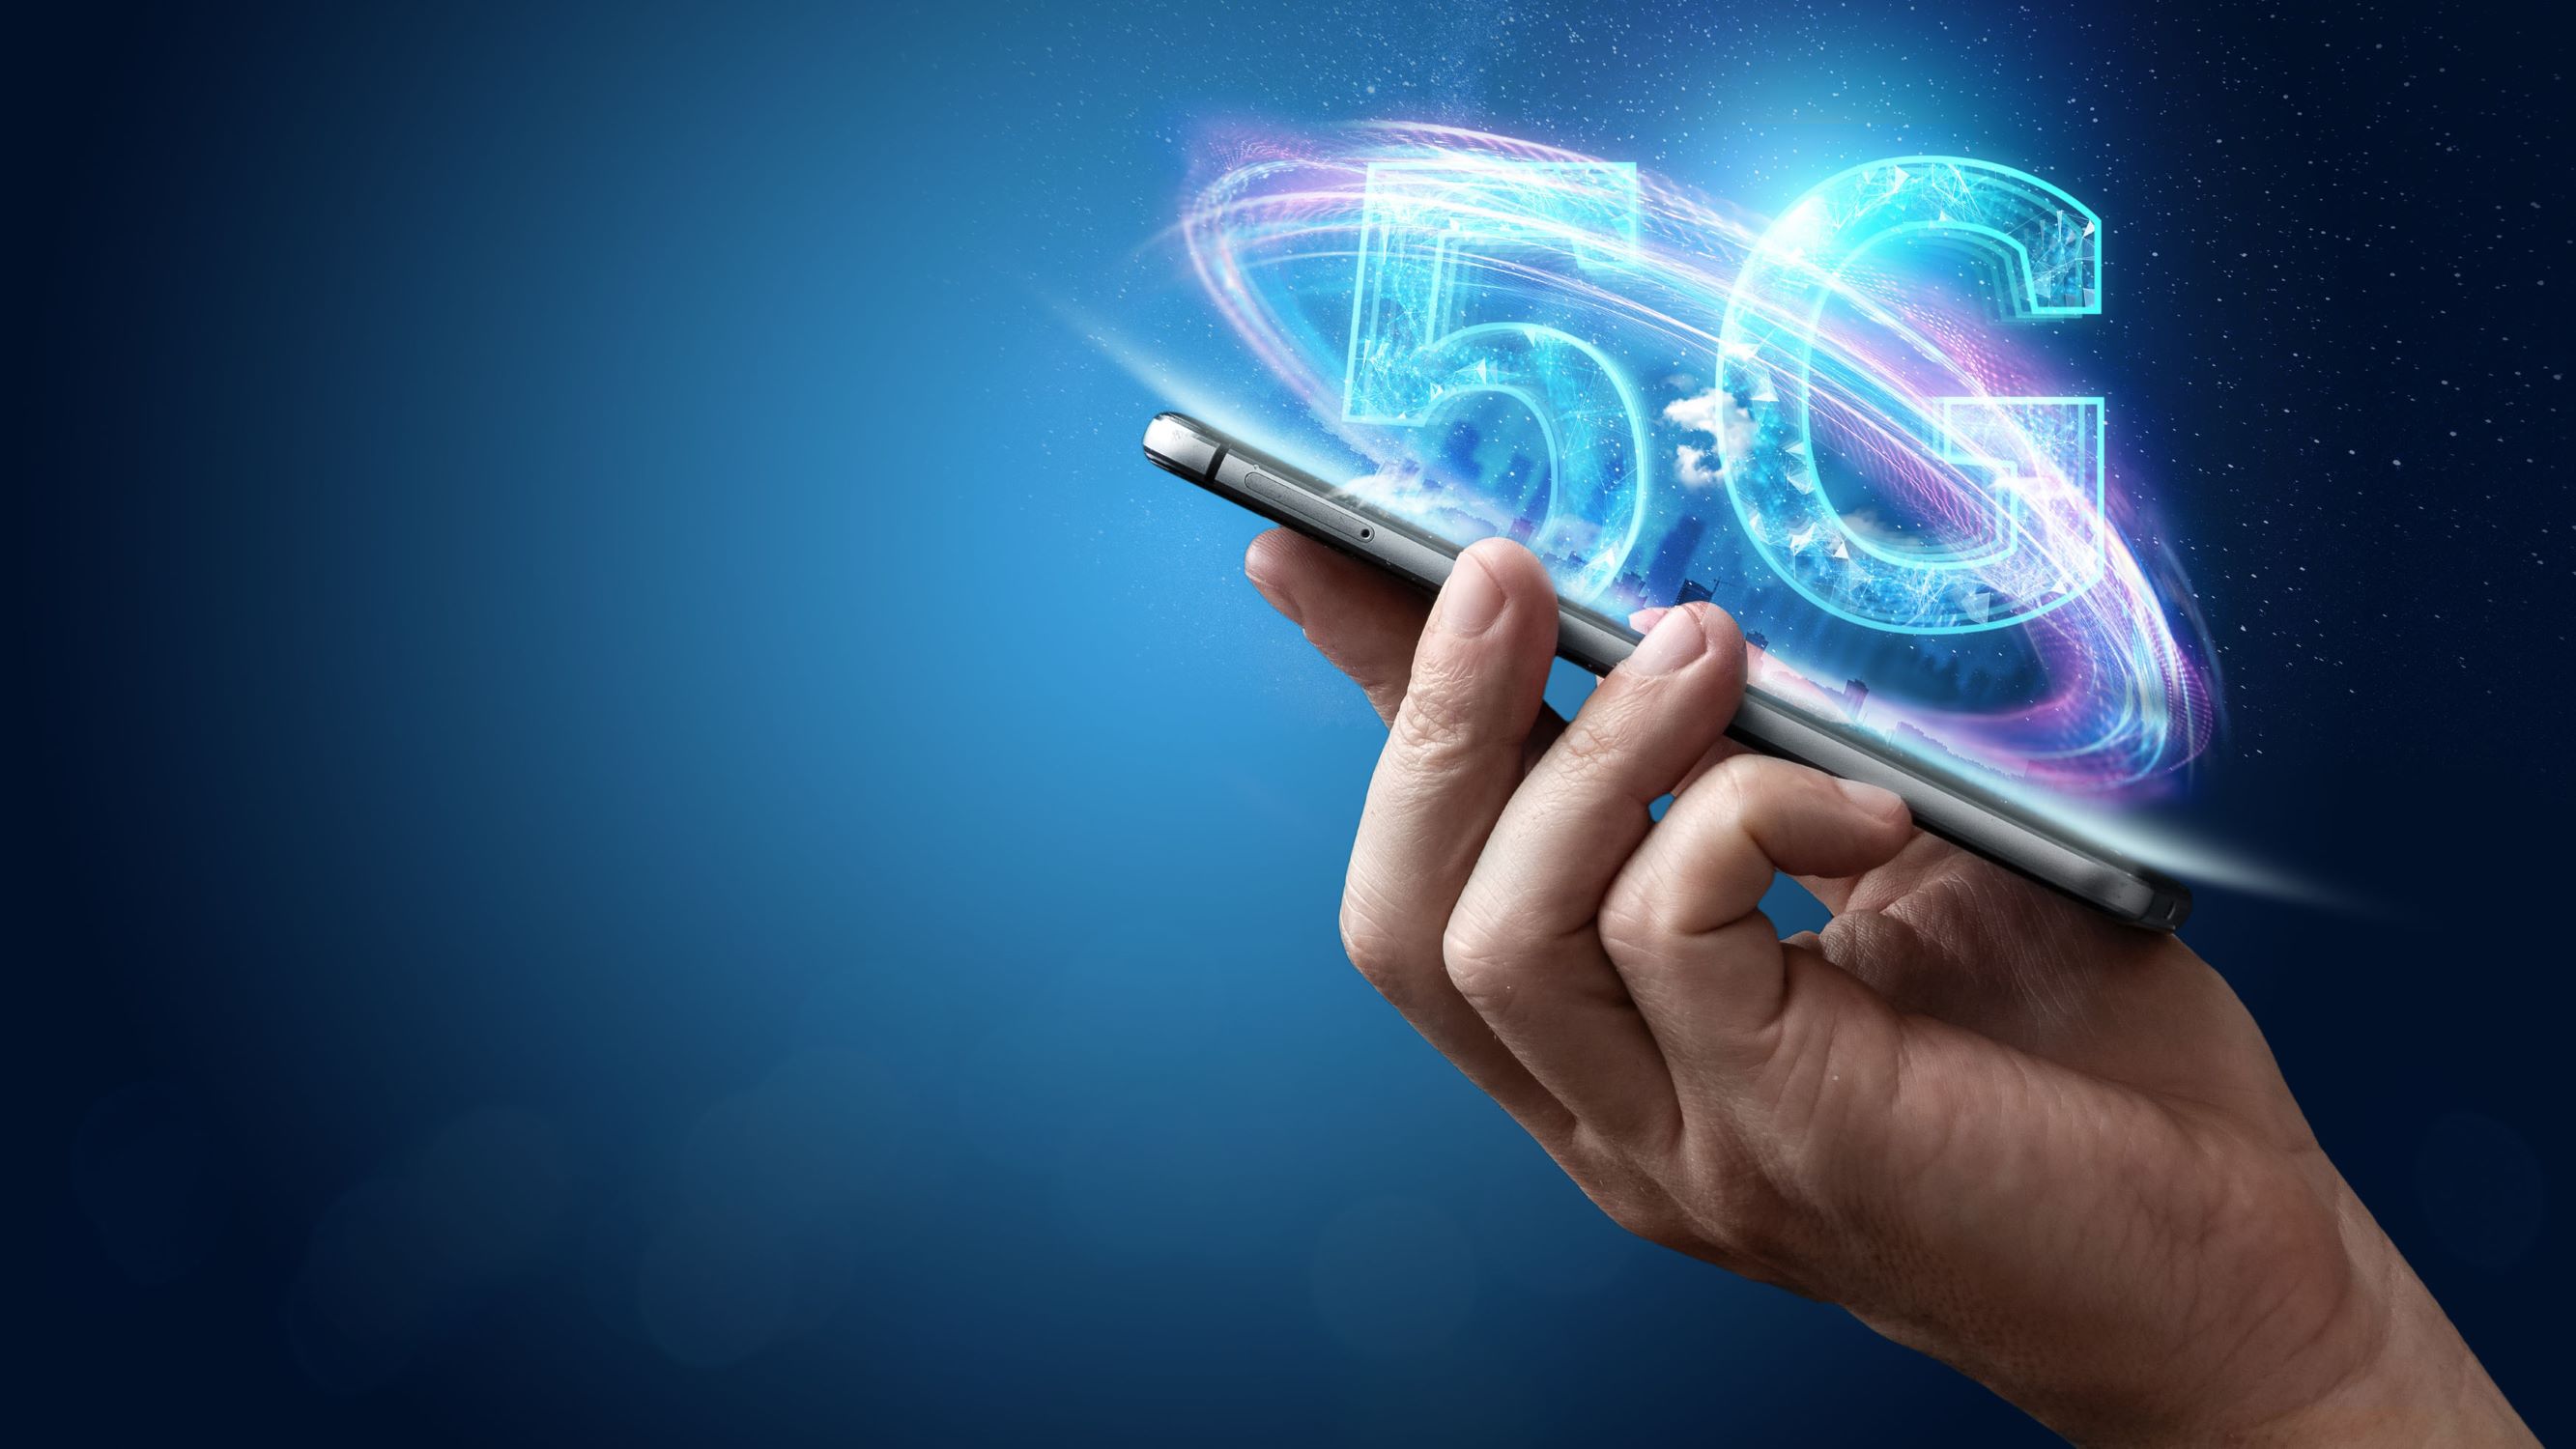 what-is-a-limitation-of-5g-mmwave-despite-its-high-speed